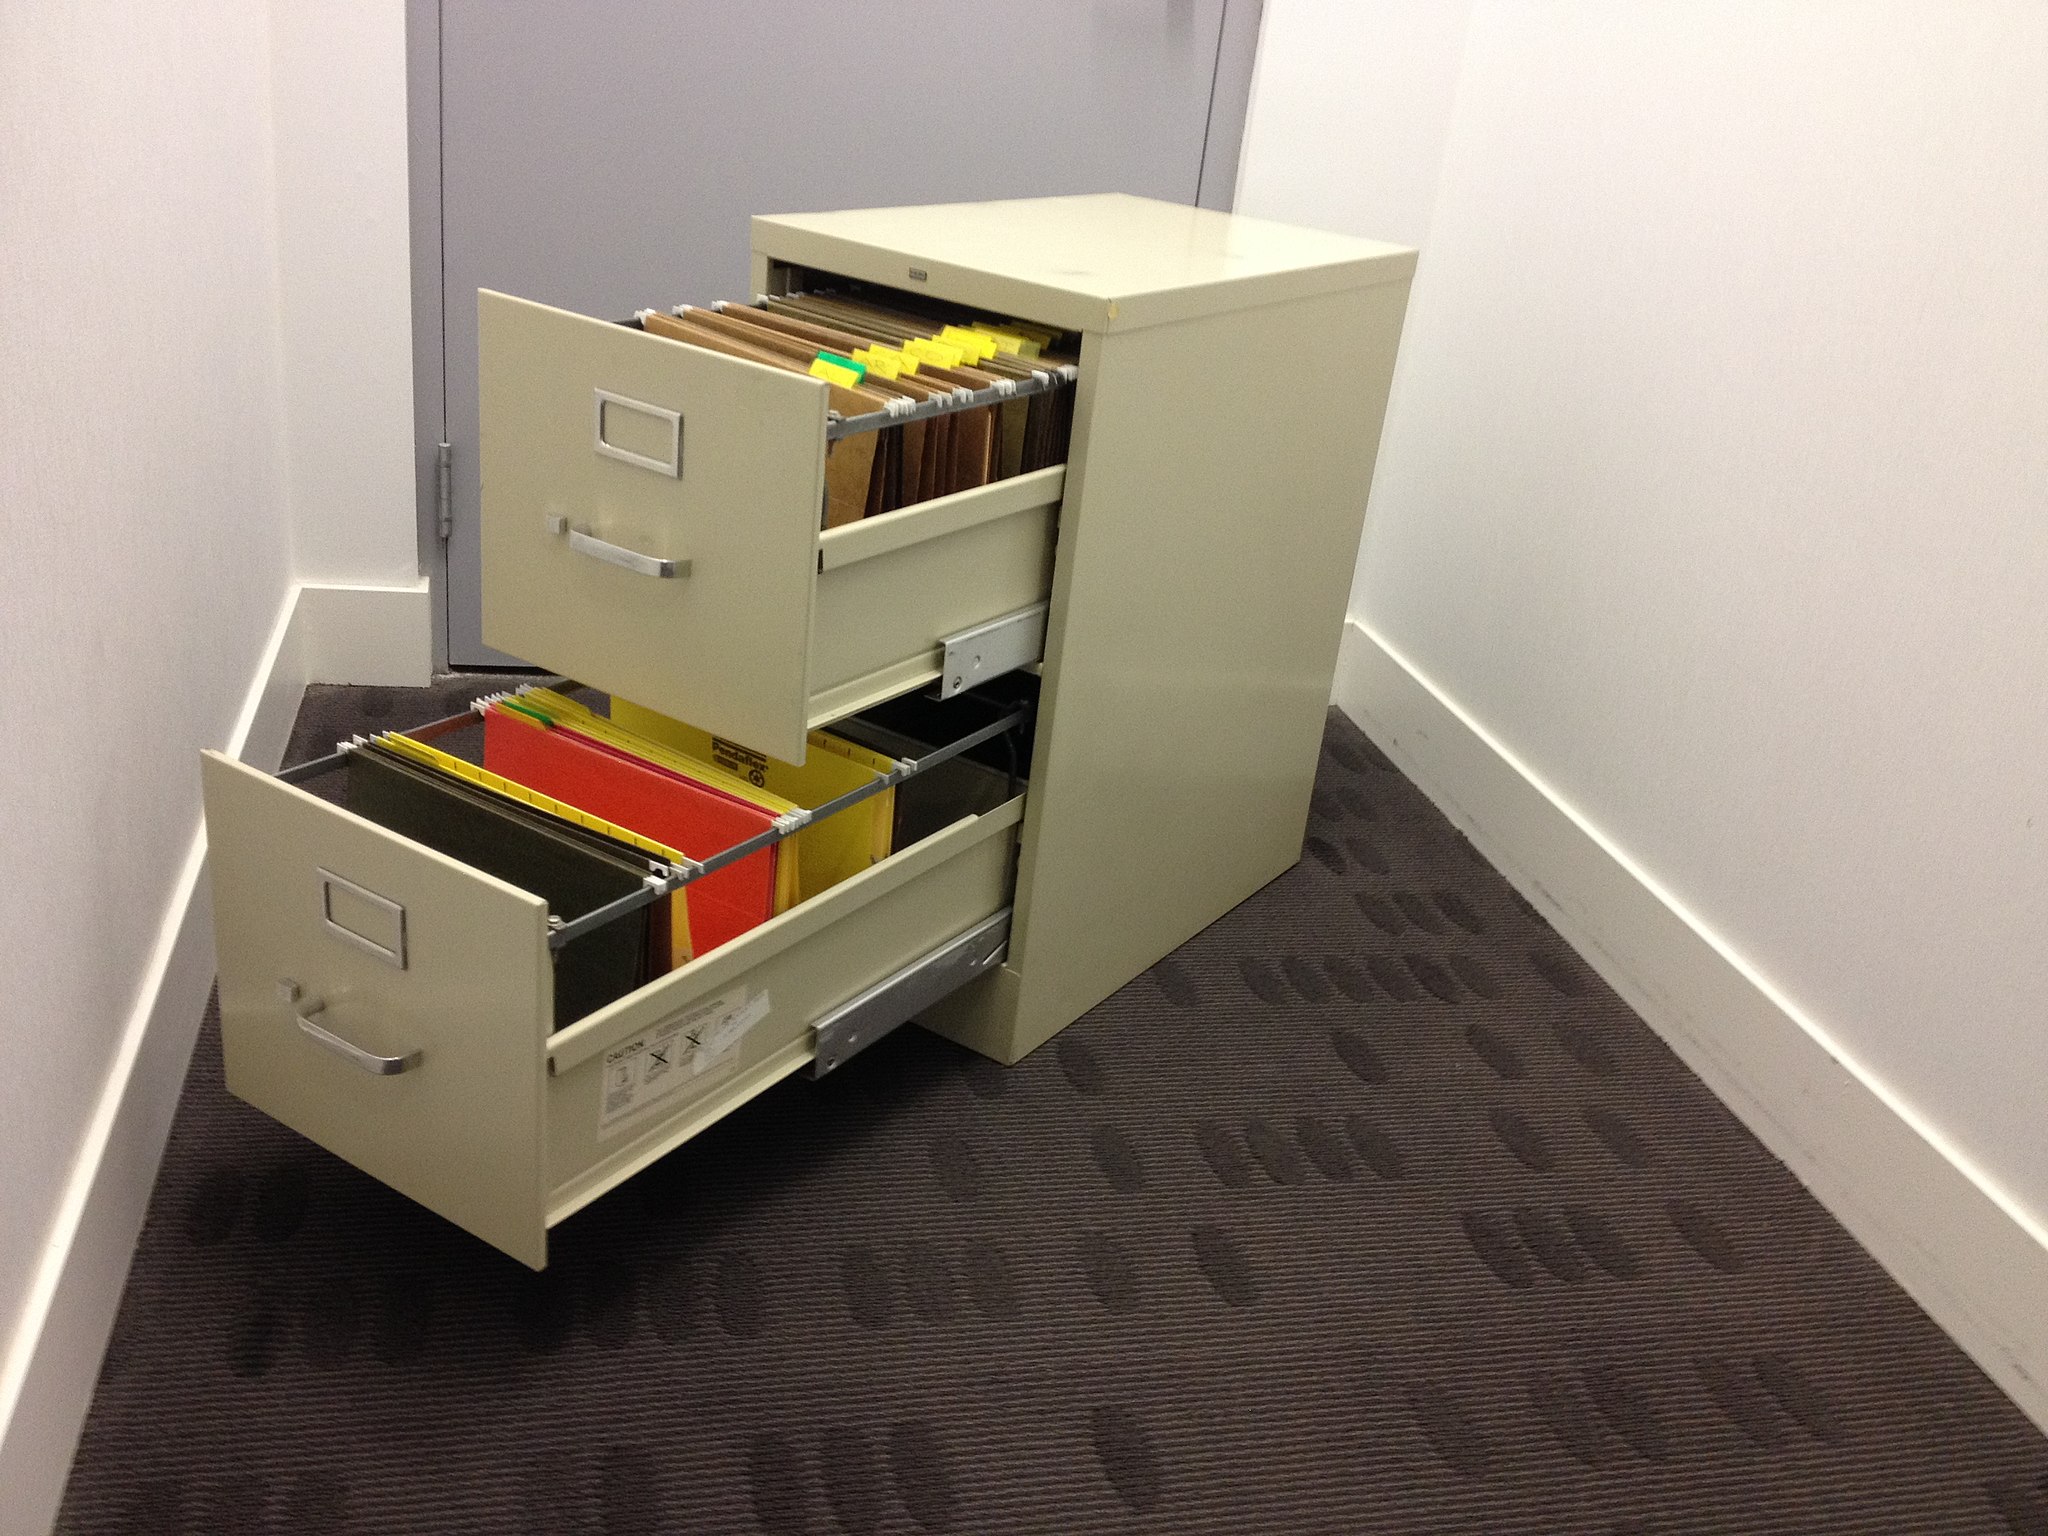 Image of a Filing cabinet